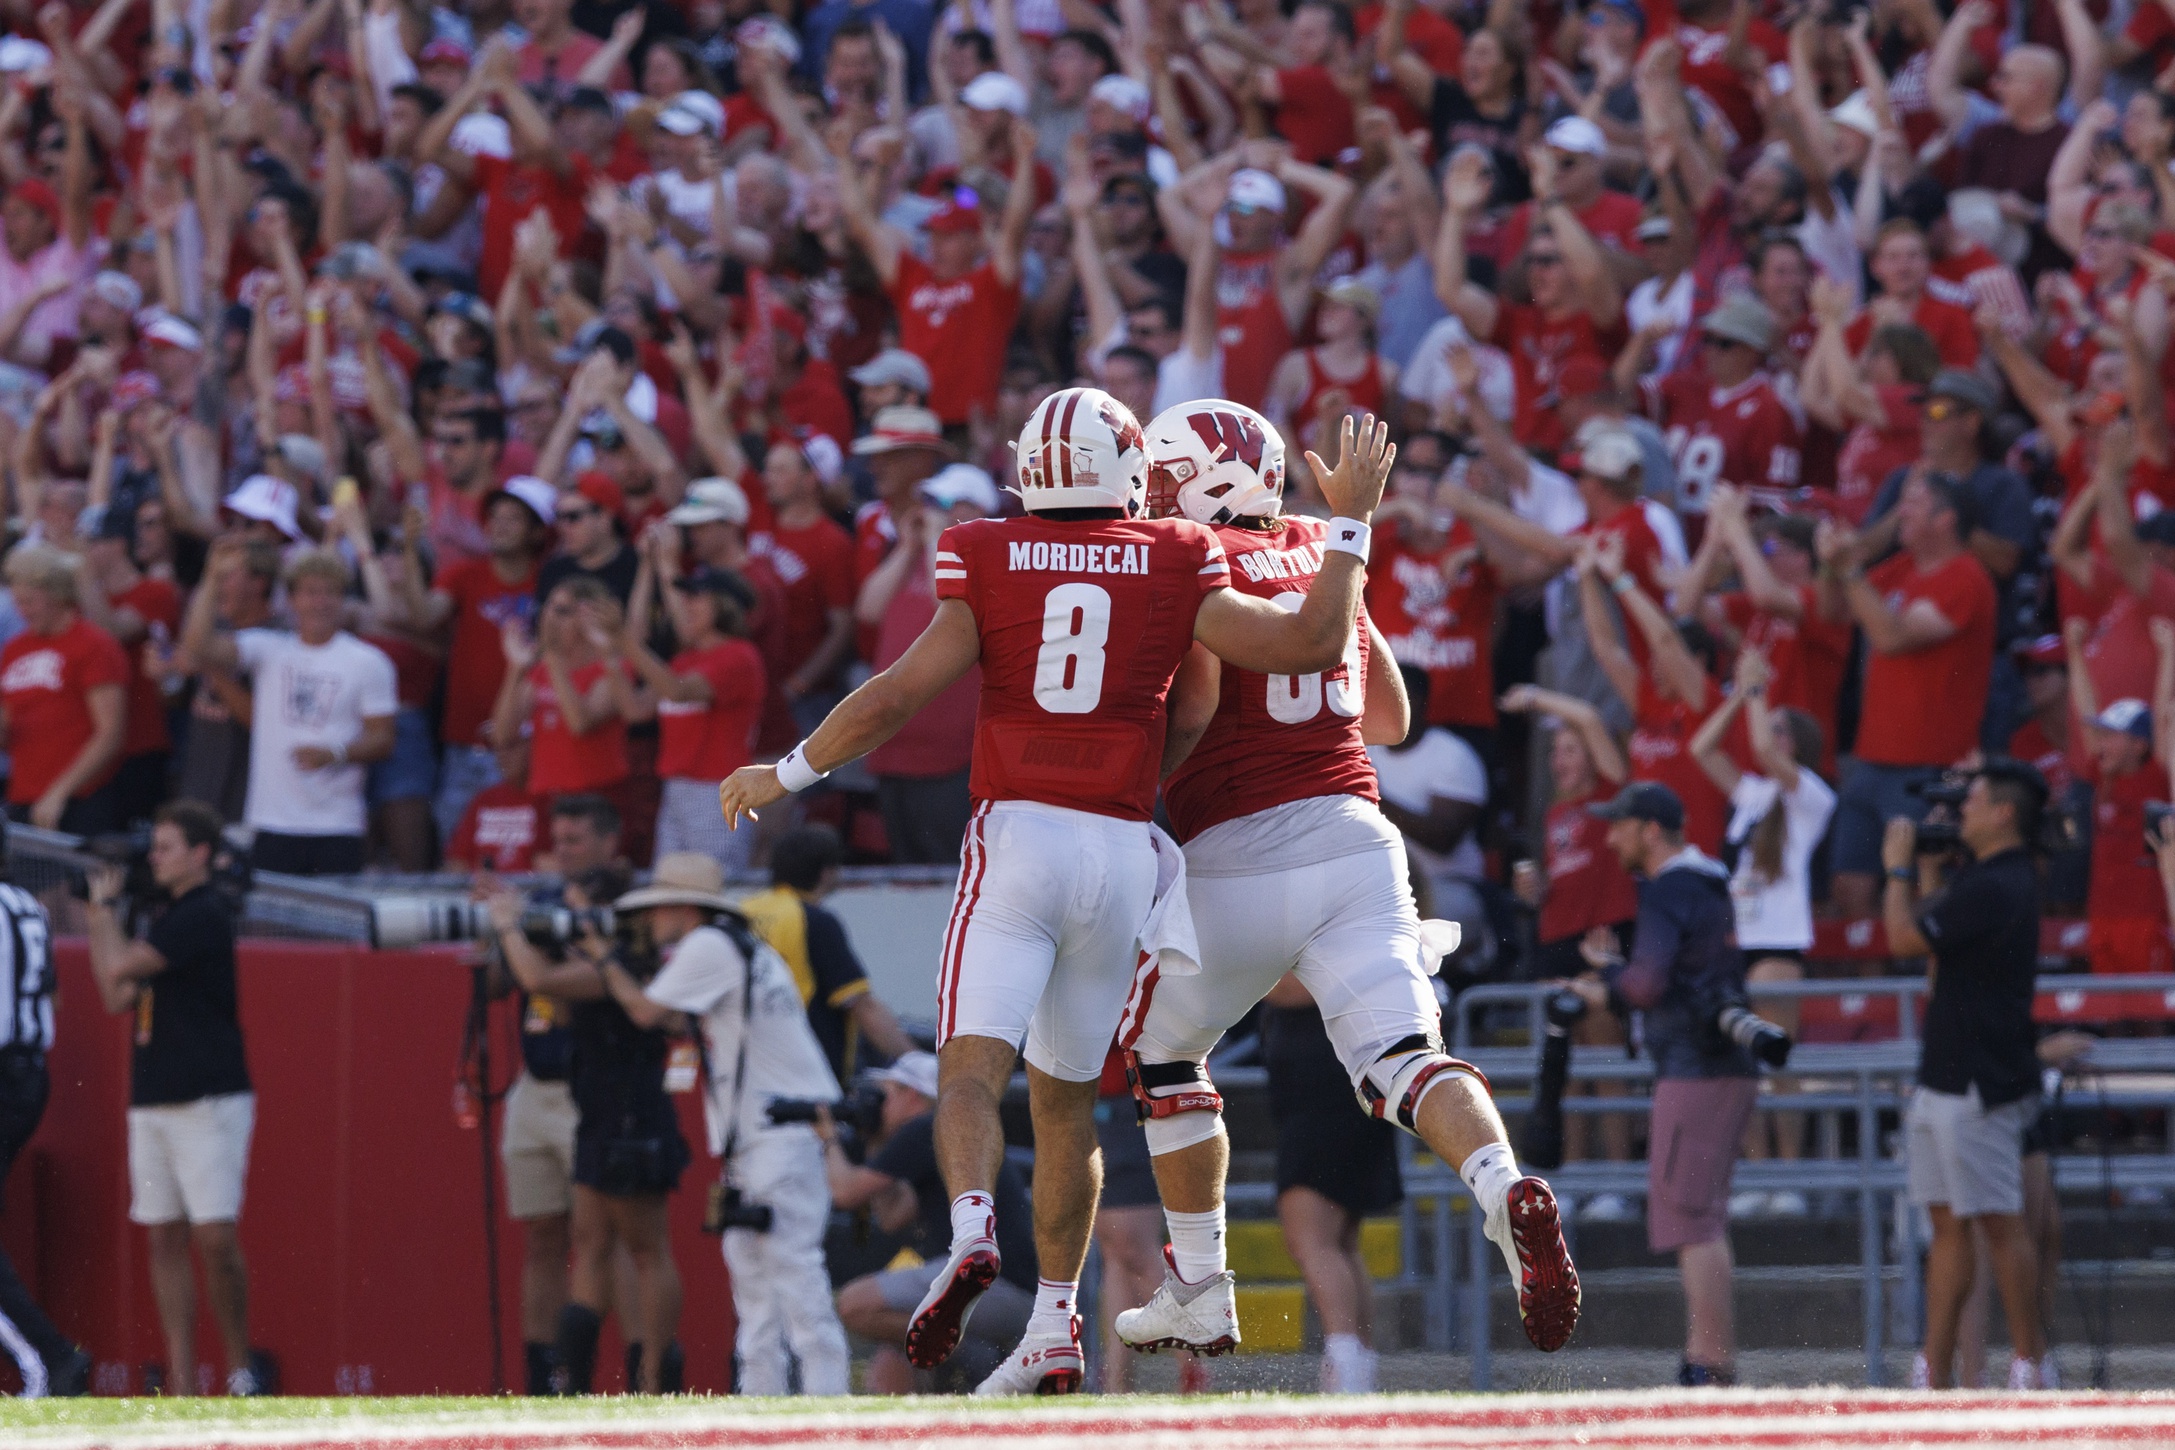 Tanner Mordecai (8) celebrates with offensive linenam Tanor Bortolini (63) following a touchdown during the third quarter against the Buffalo Bulls at Camp Randall Stadium.